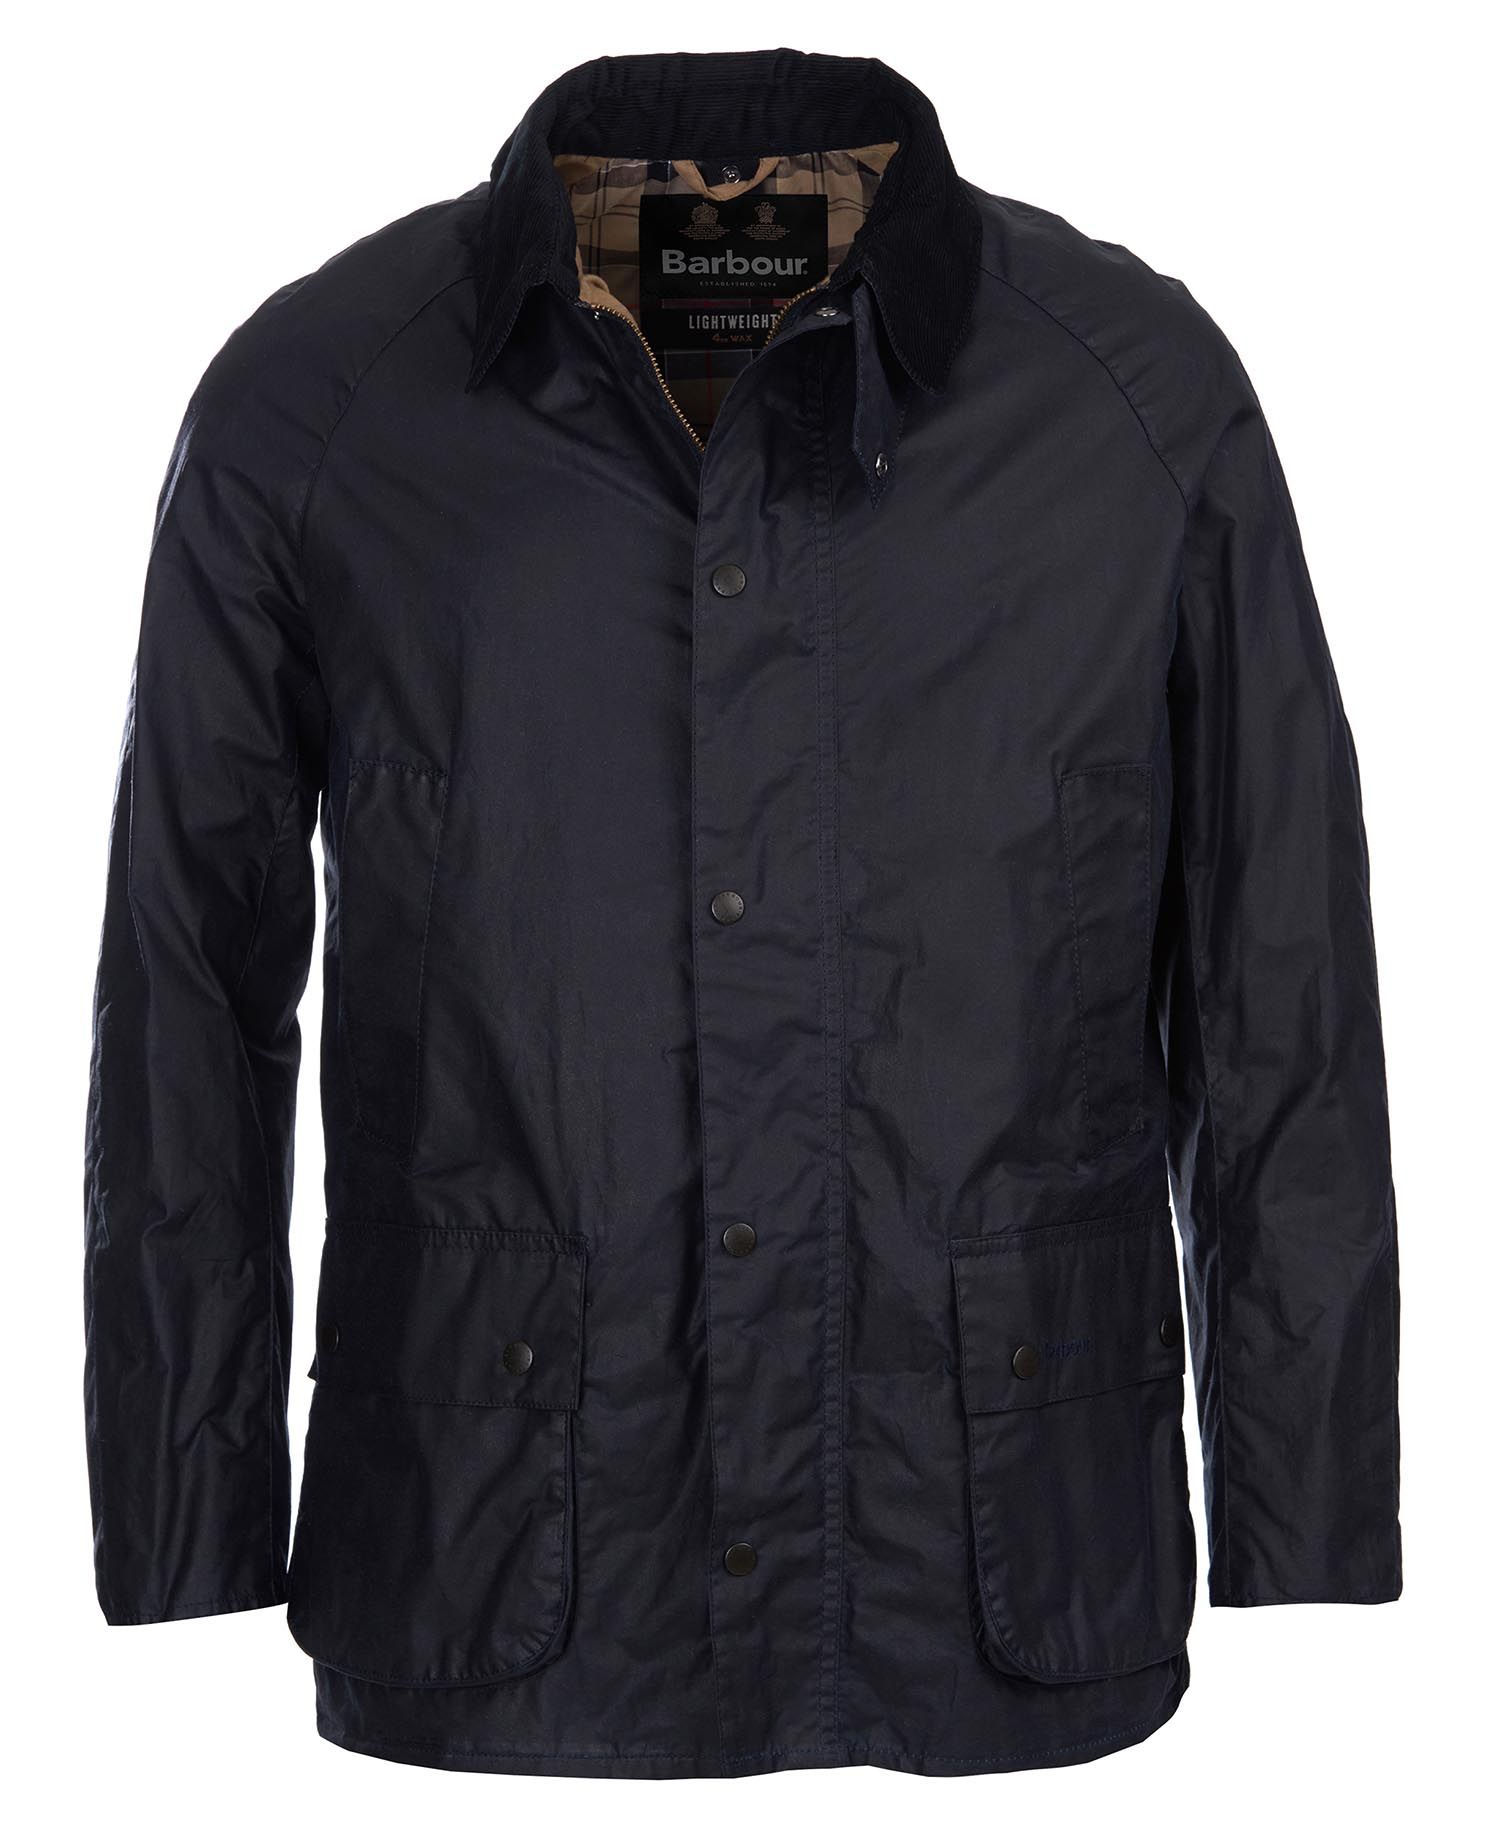 Barbour Lightweight Ashby Waxed Cotton Jacket in Navy | Barbour